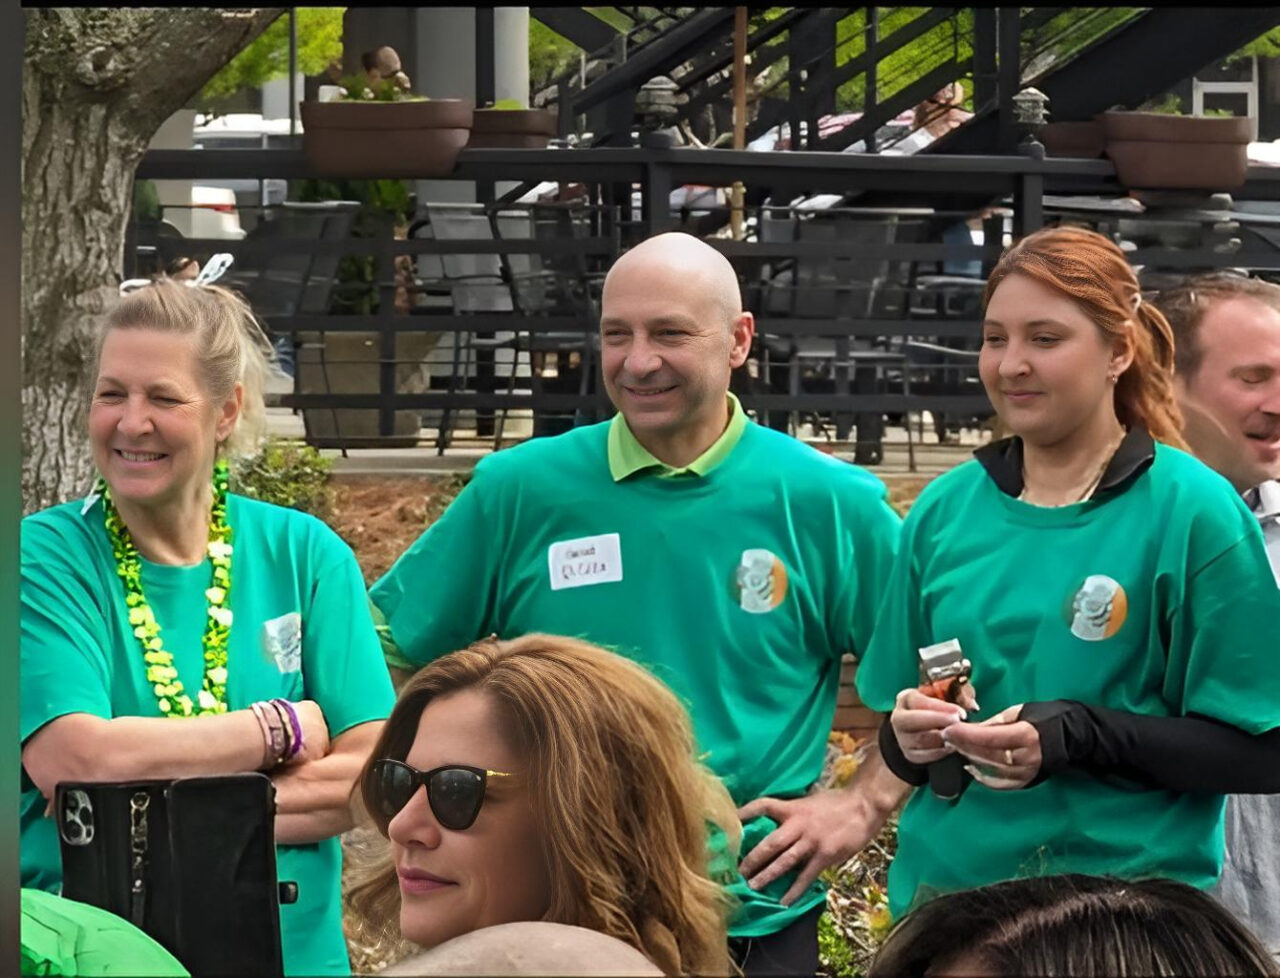 The collaboration that ultimately led to a phase II clinical trial at Massachusetts General Hospital, where Serena found her miracle – St. Baldrick’s Foundation